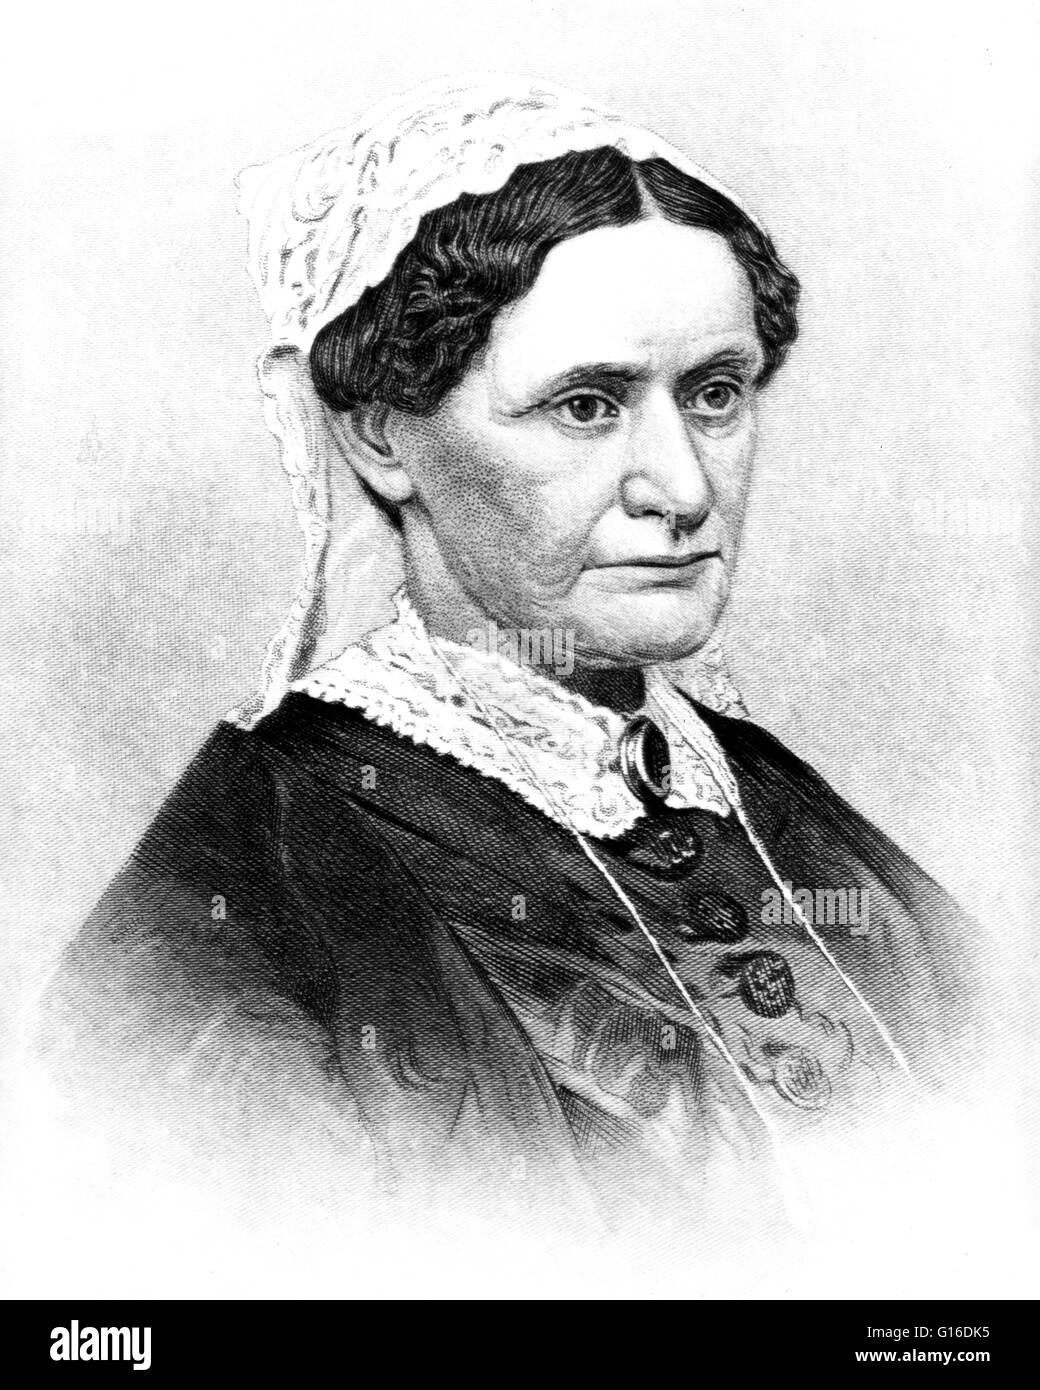 Mrs. Andrew Johnson engraved by John Chester Buttre, 1883. Eliza McCardle Johnson (October 4, 1810 - January 15, 1876) was the First Lady of the United States and the wife of Andrew Johnson, the 17th President of the United States. In1826, Eliza was chatt Stock Photo